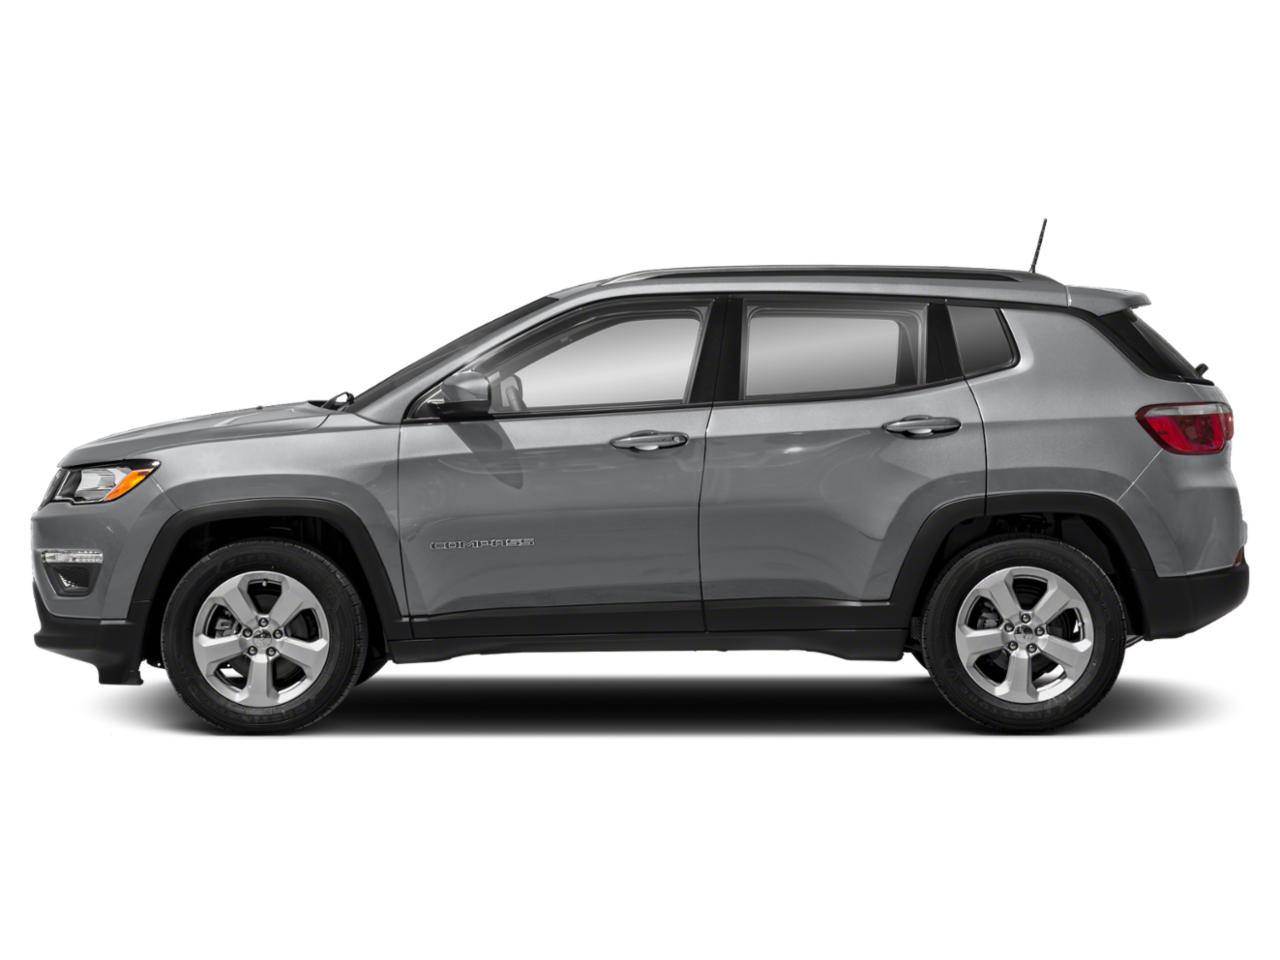 Used Billet Silver Metallic Clearcoat 2018 Jeep Compass Limited (With ...